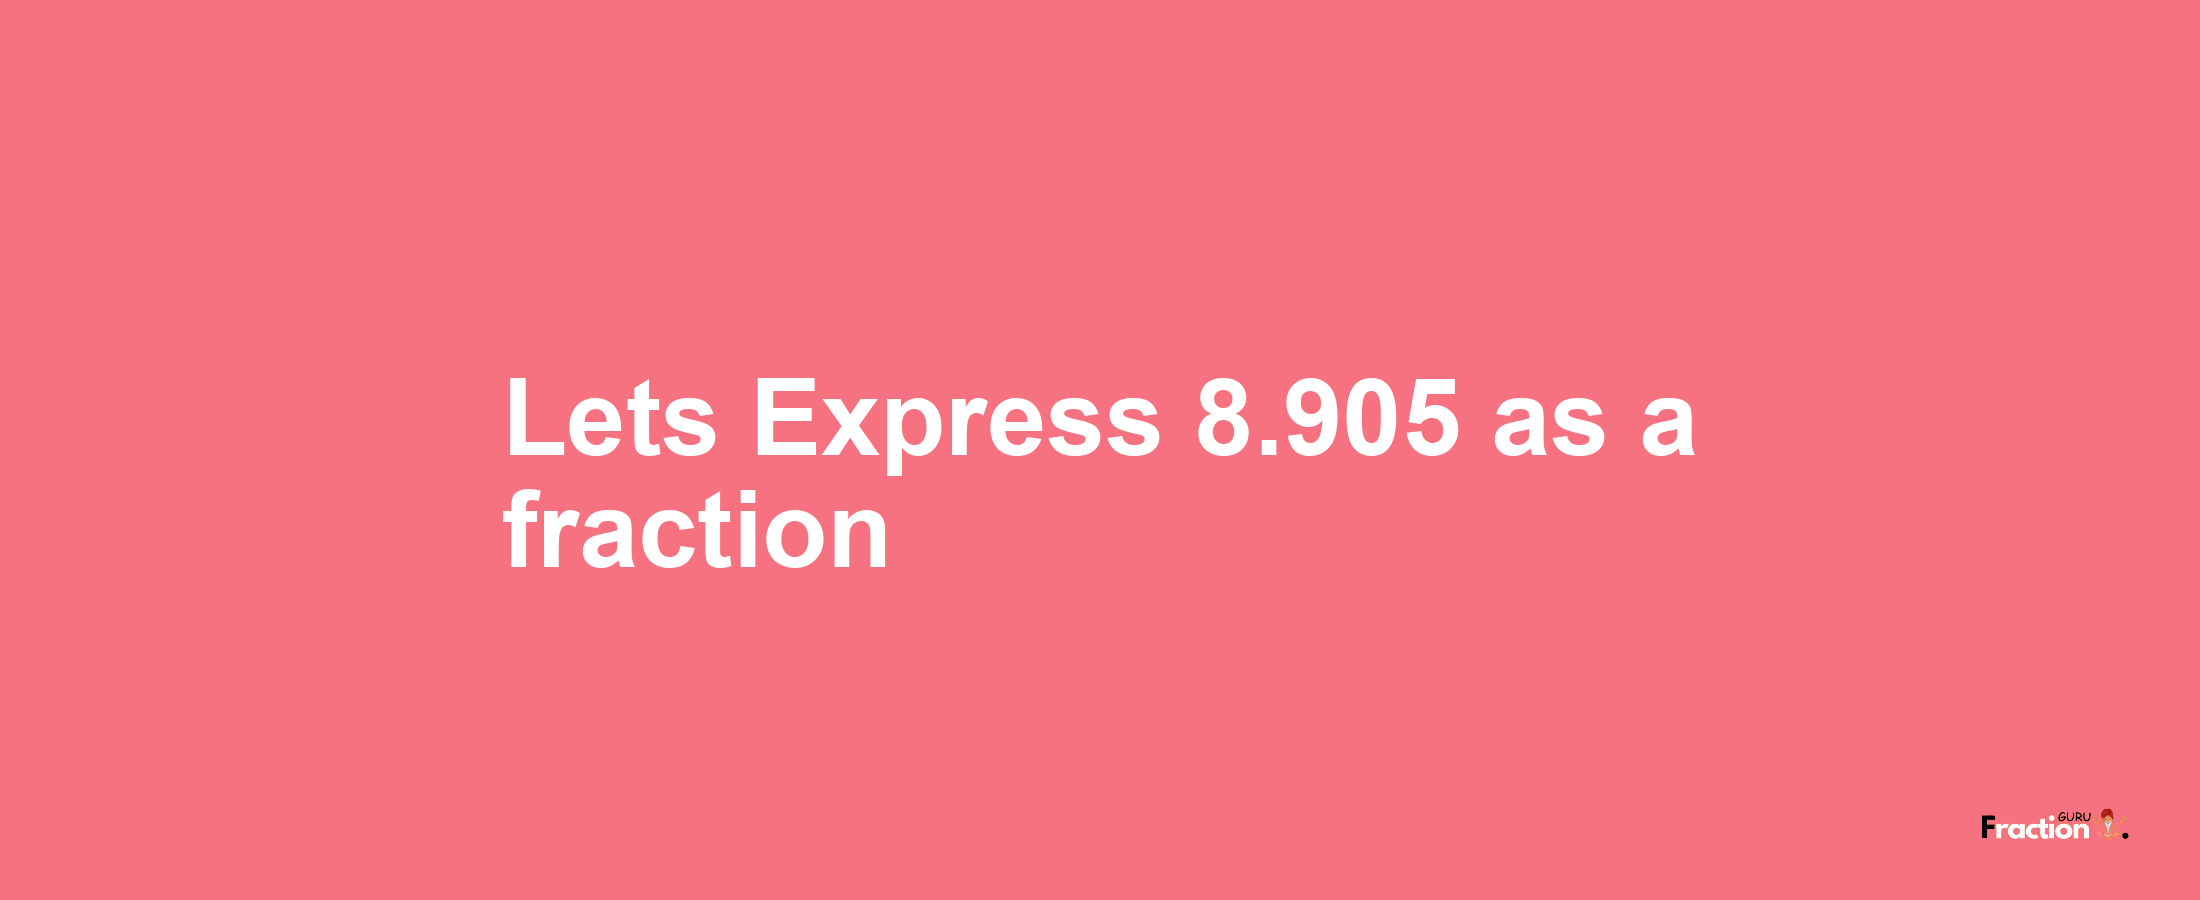 Lets Express 8.905 as afraction